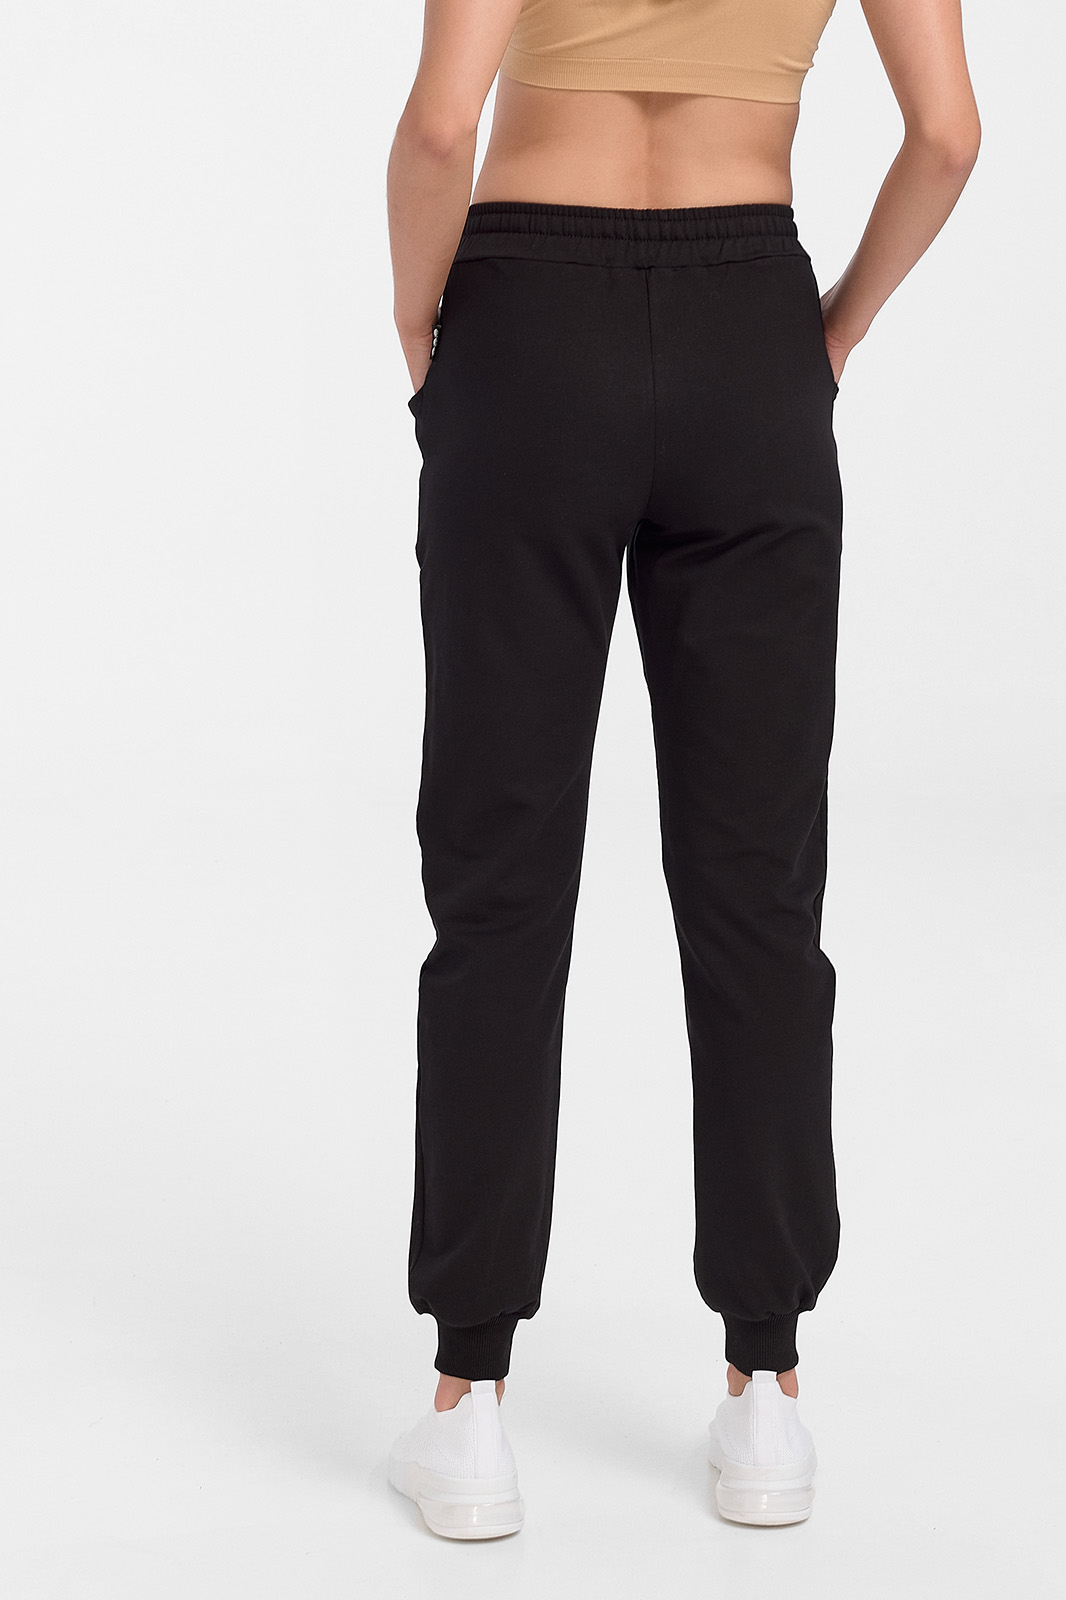 Women's ANS Sweatpants with elastic waistband